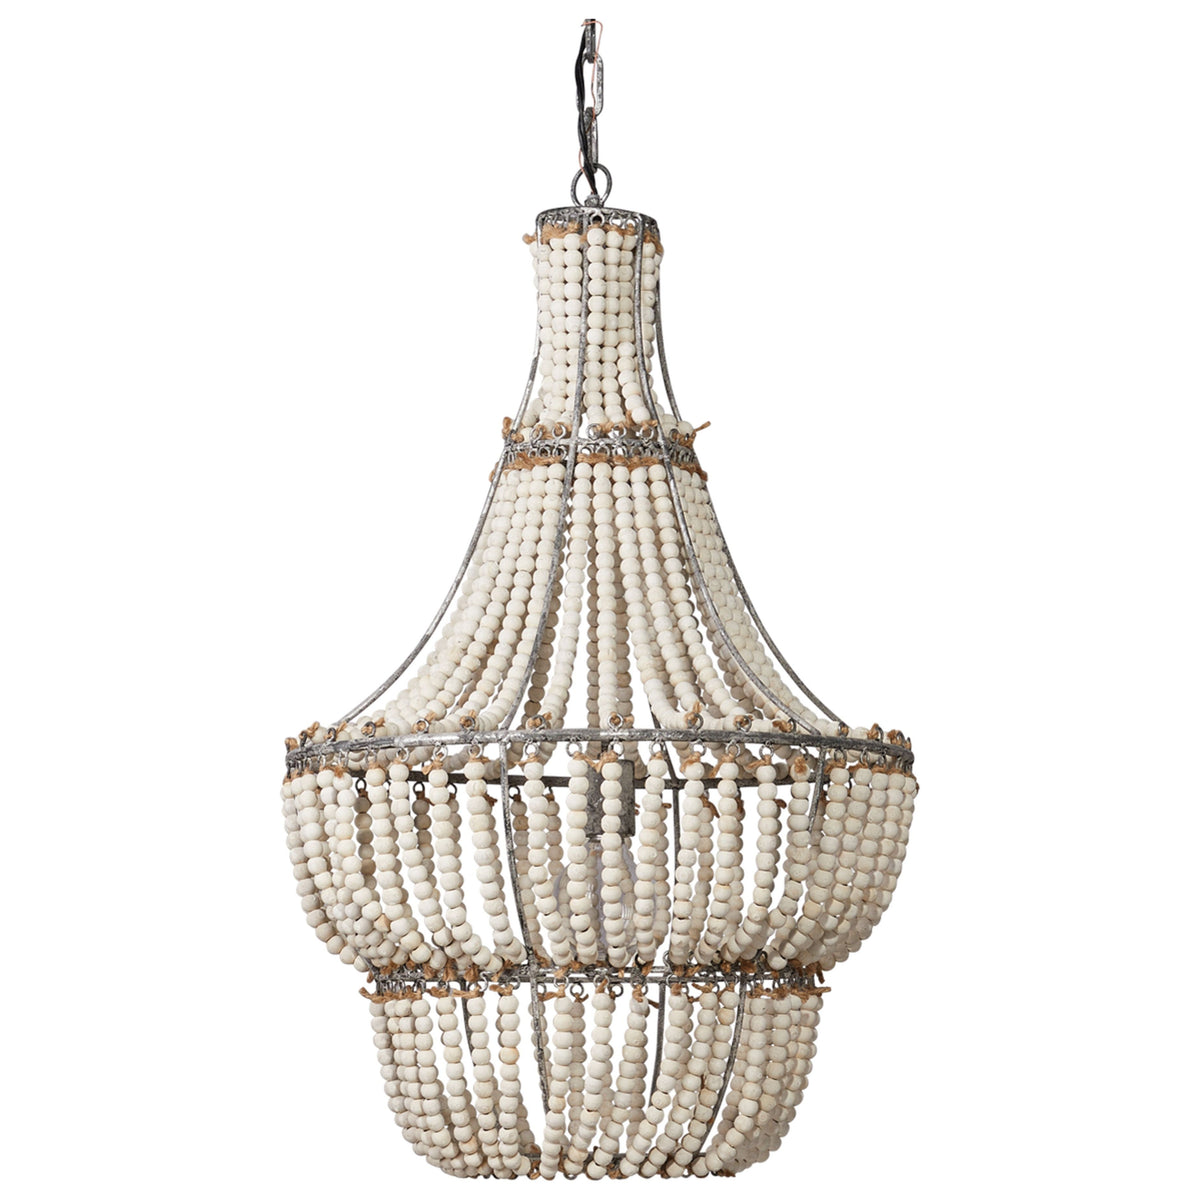 Jamie Young Company - CH106 - Blanca Chandelier - Blanca - White Washed